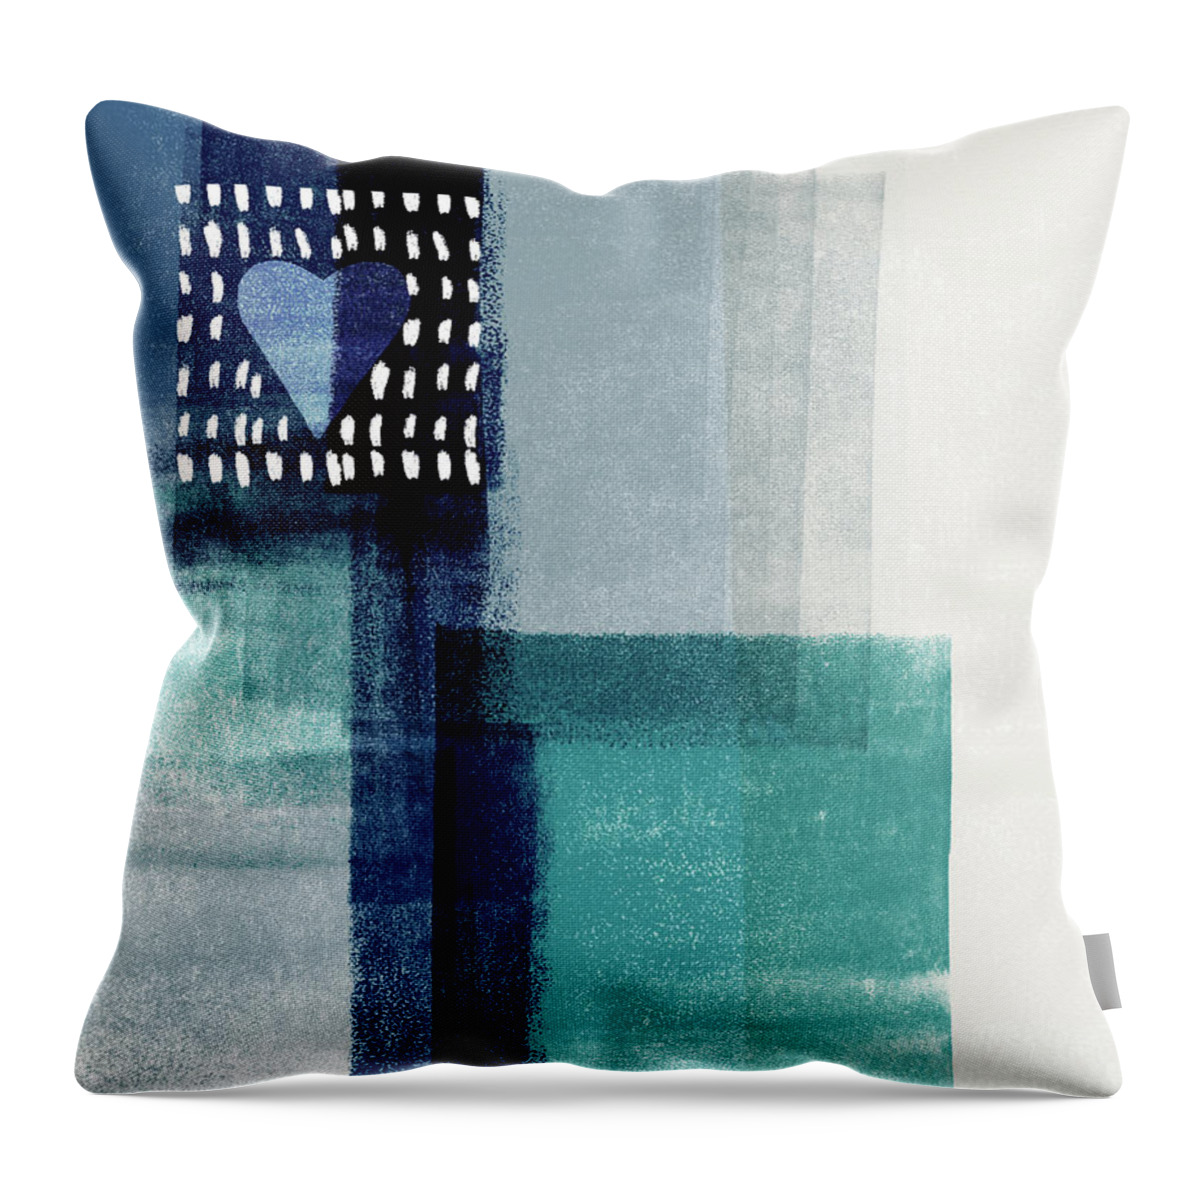 Minimal Throw Pillow featuring the mixed media Love In Shades Of Blue- Abstract Art by Linda Woods by Linda Woods